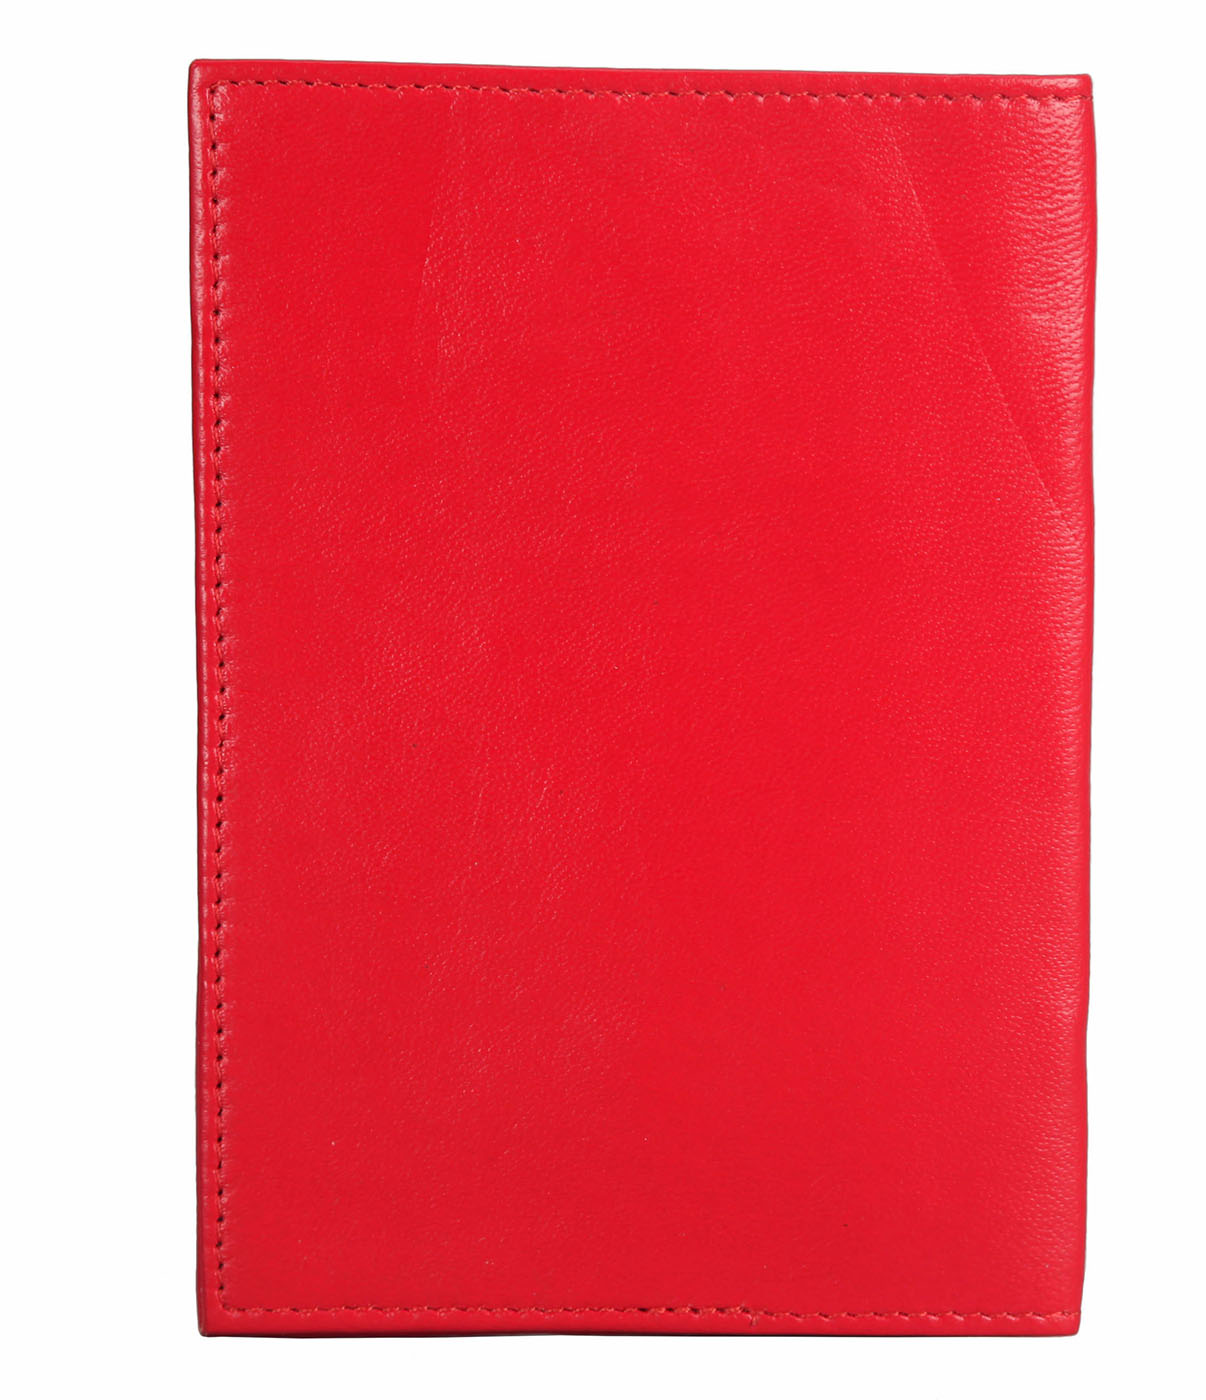 W73--Passport cover in Genuine Leather - Red